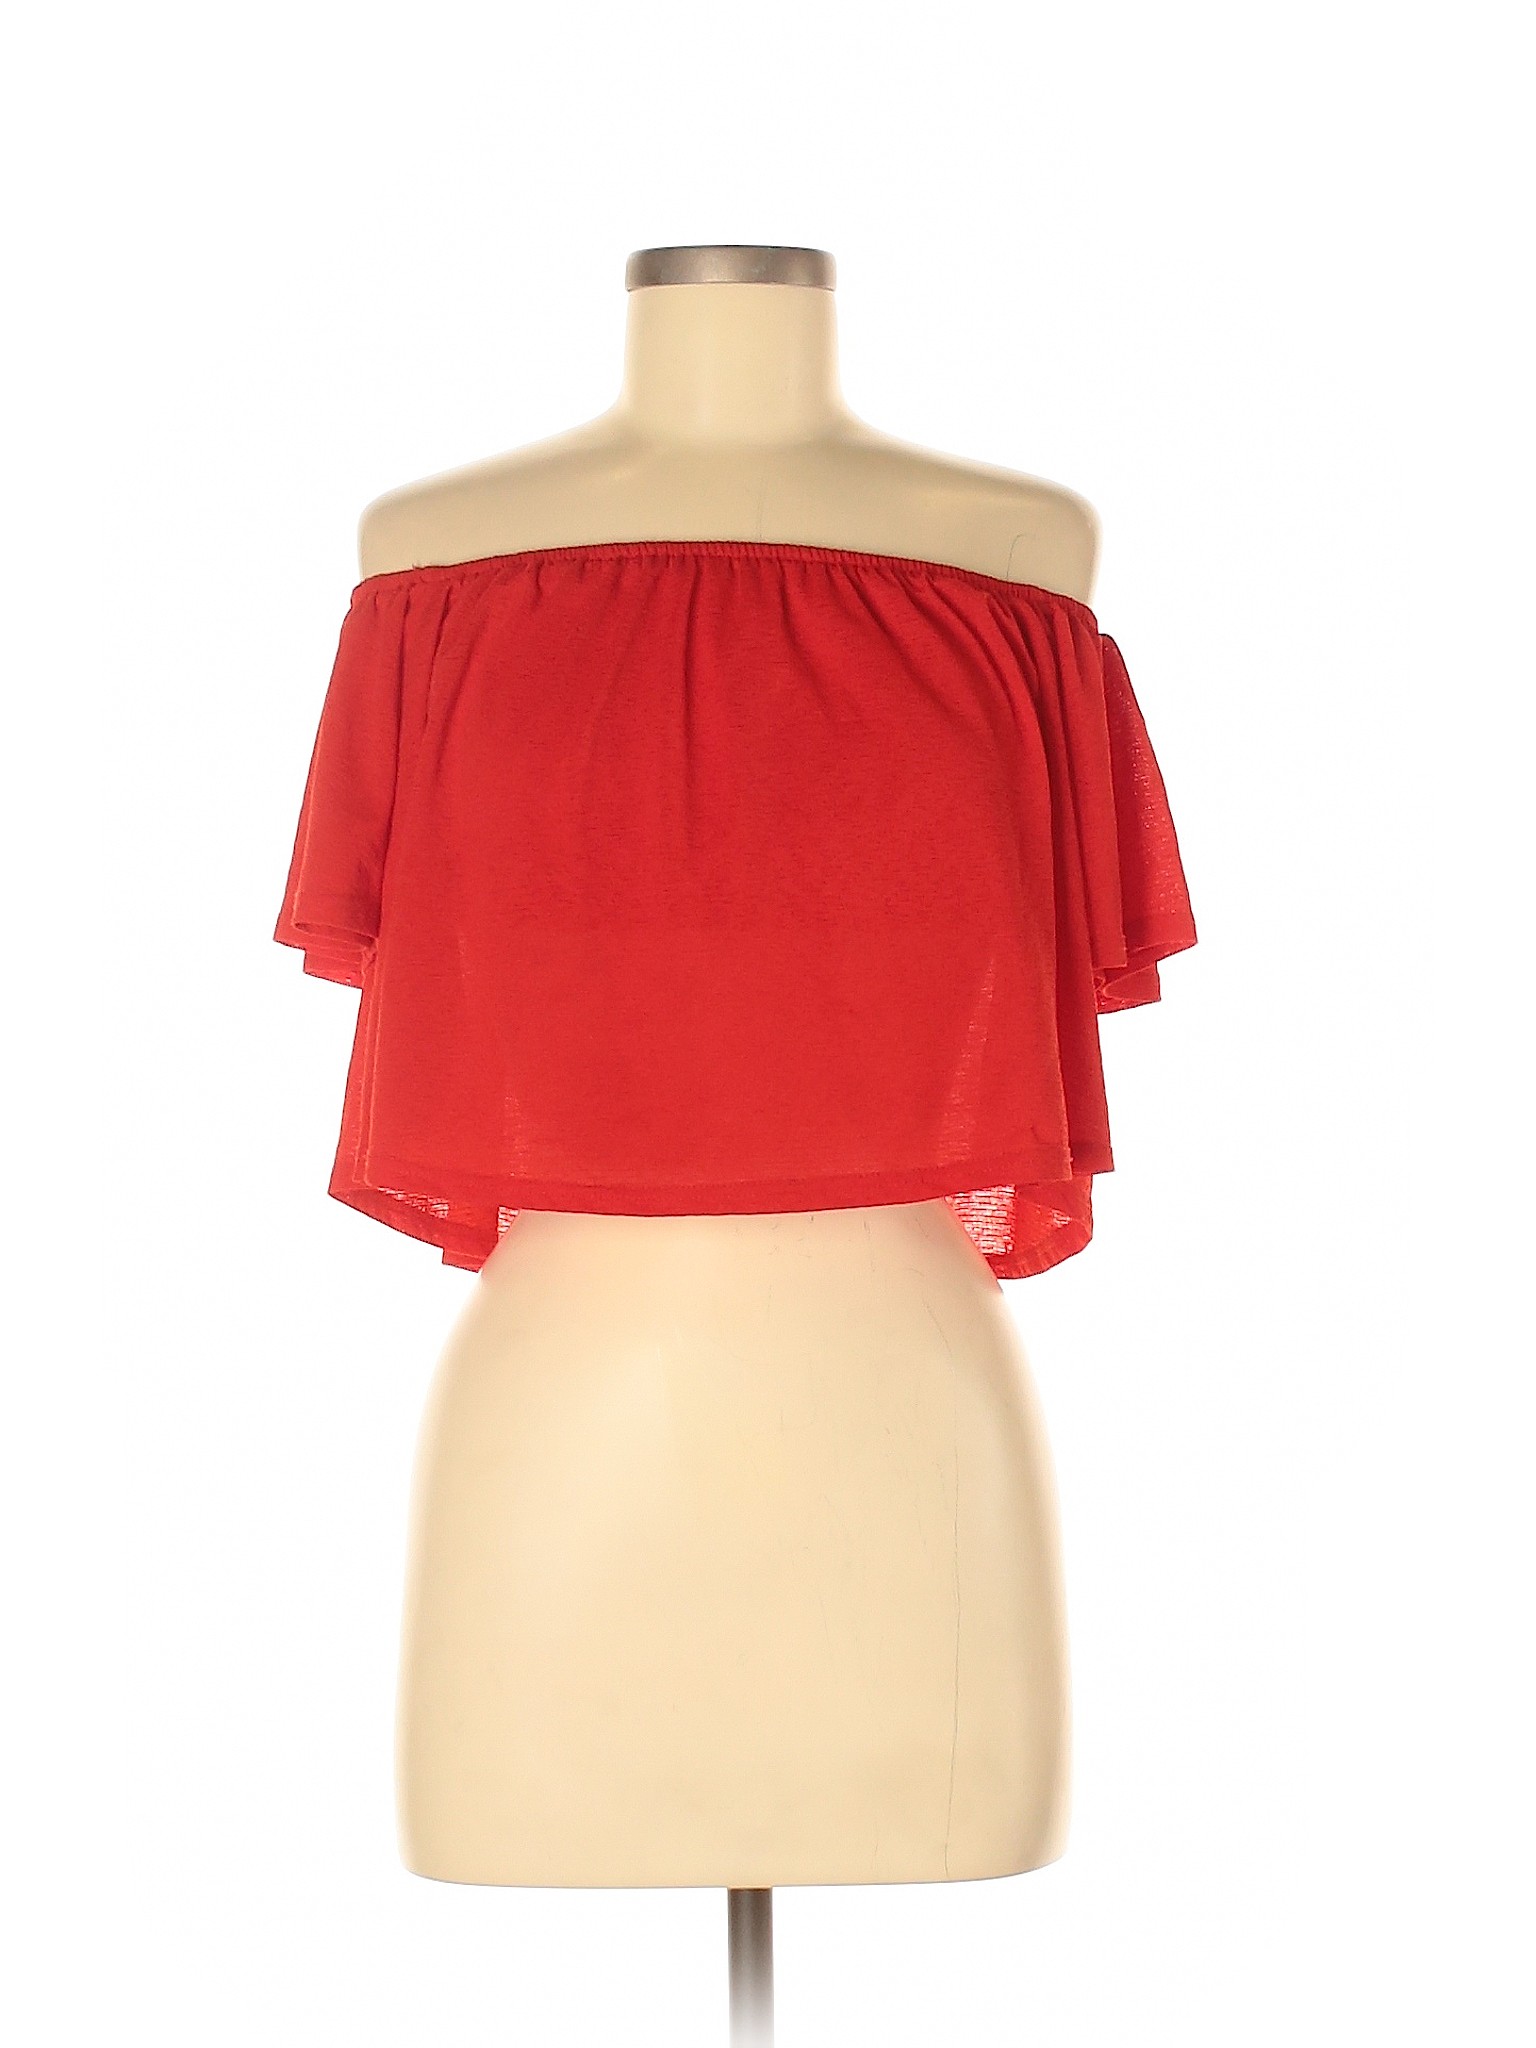 Atmosphere Red Short Sleeve Top Size 6 - 66% off | thredUP